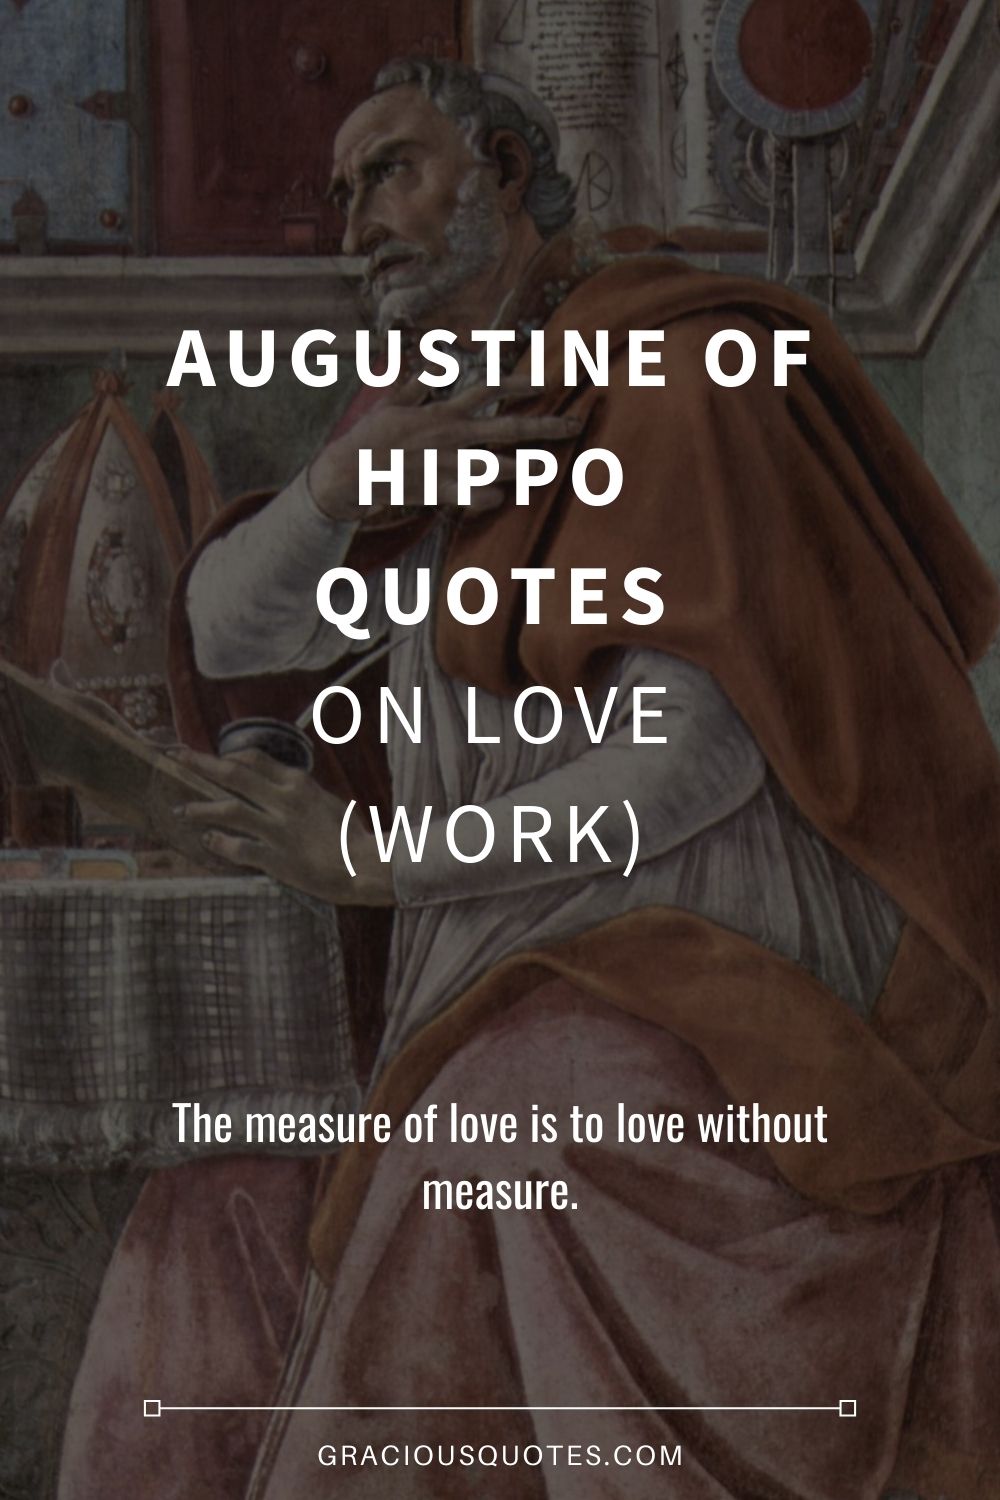 Augustine of Hippo Quotes on Love (WORK) - Gracious Quotes